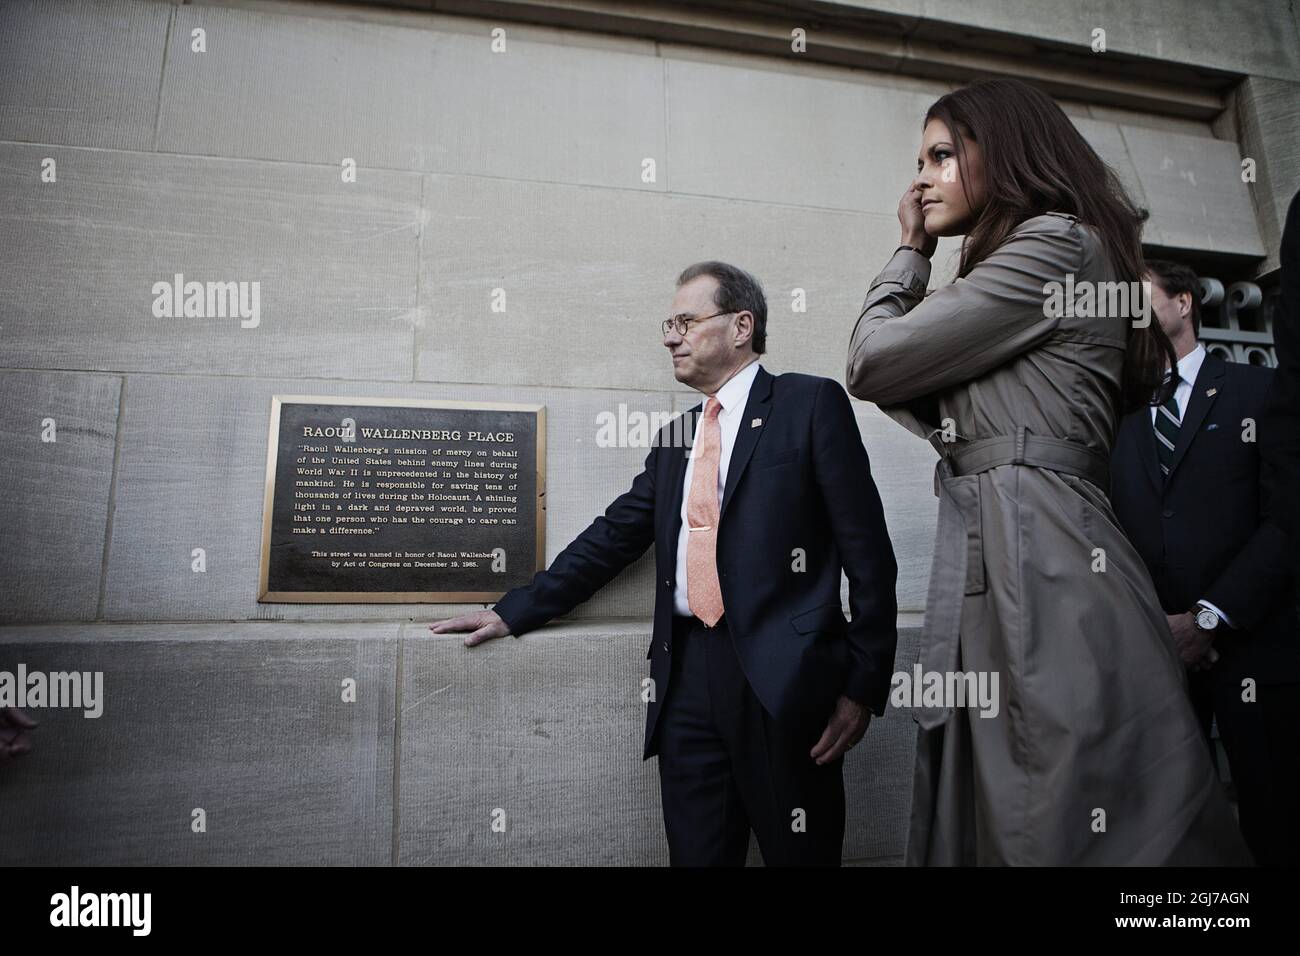 Princess Madeleine of Sweden is seen together with the Speaker of the Parliament of Sweden Per Westerberg by a plaque honoring Raoul Wallenberg during memorial service for the holocaust victims in Washington, USA, April 19, 2012. Foto: Axel Oberg / XP / SCANPIX / kod 7139 Stock Photo